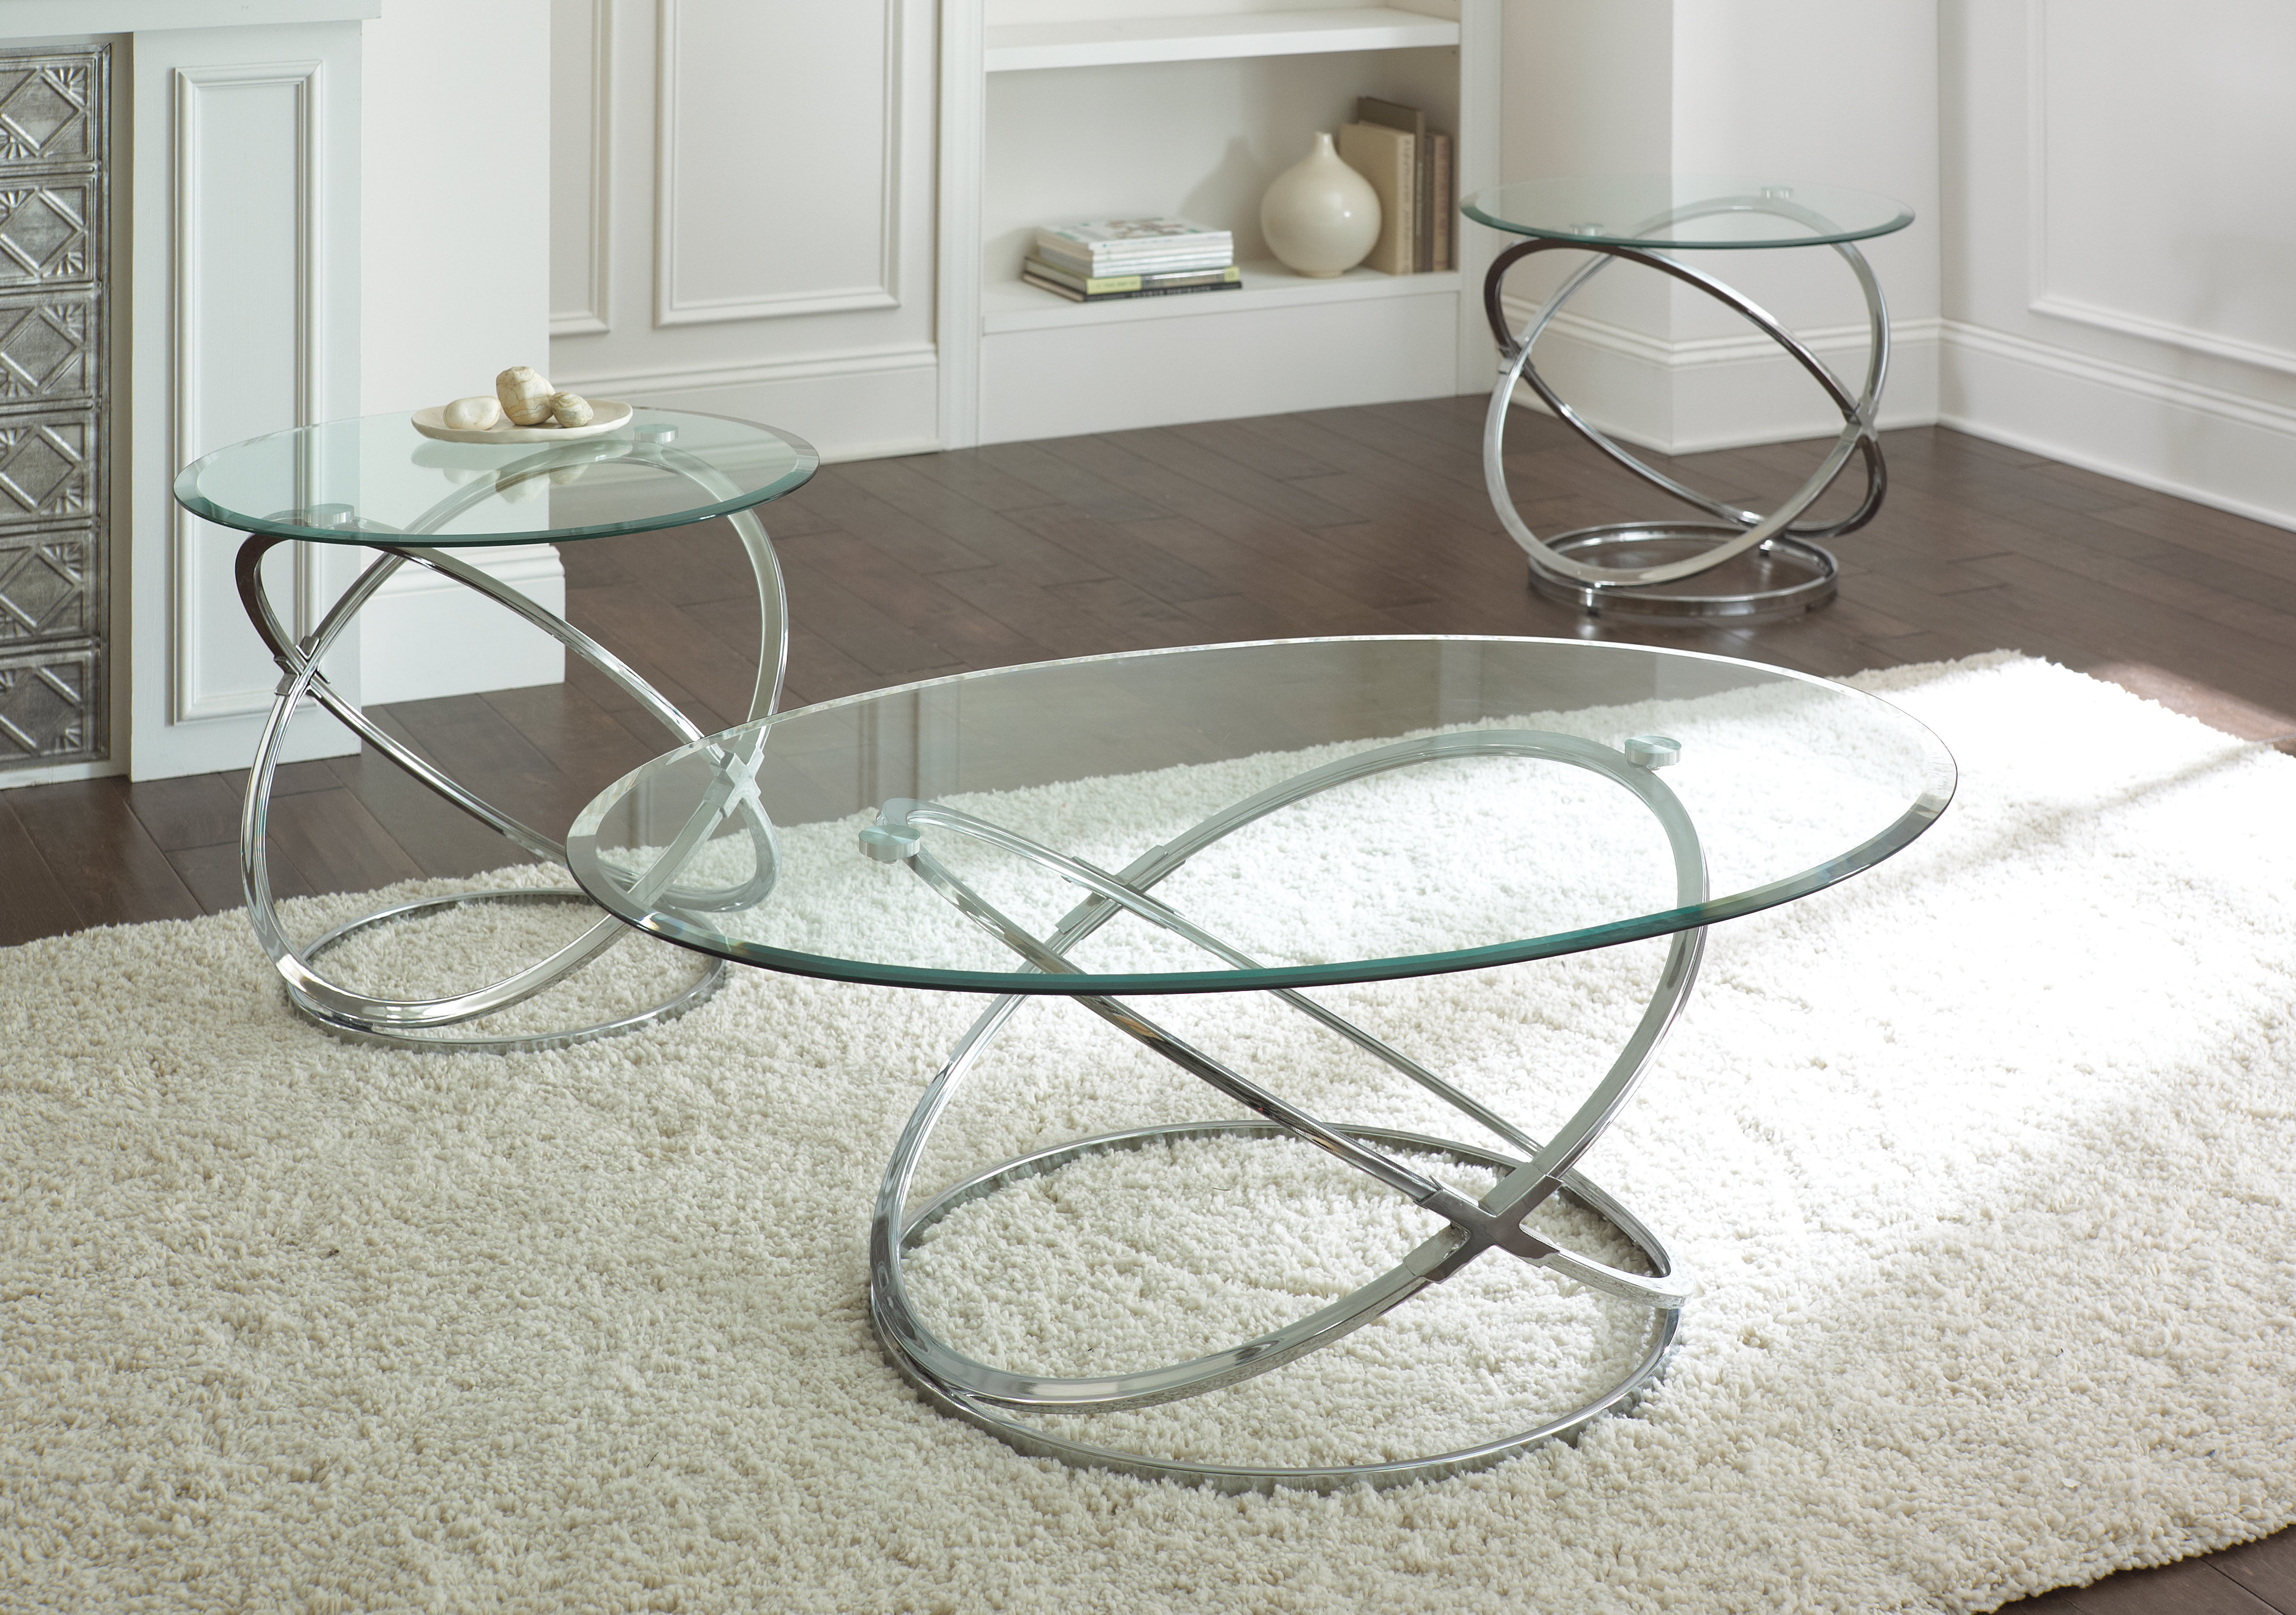 Coffee Tables & End Table Sets on Sale - American Freight